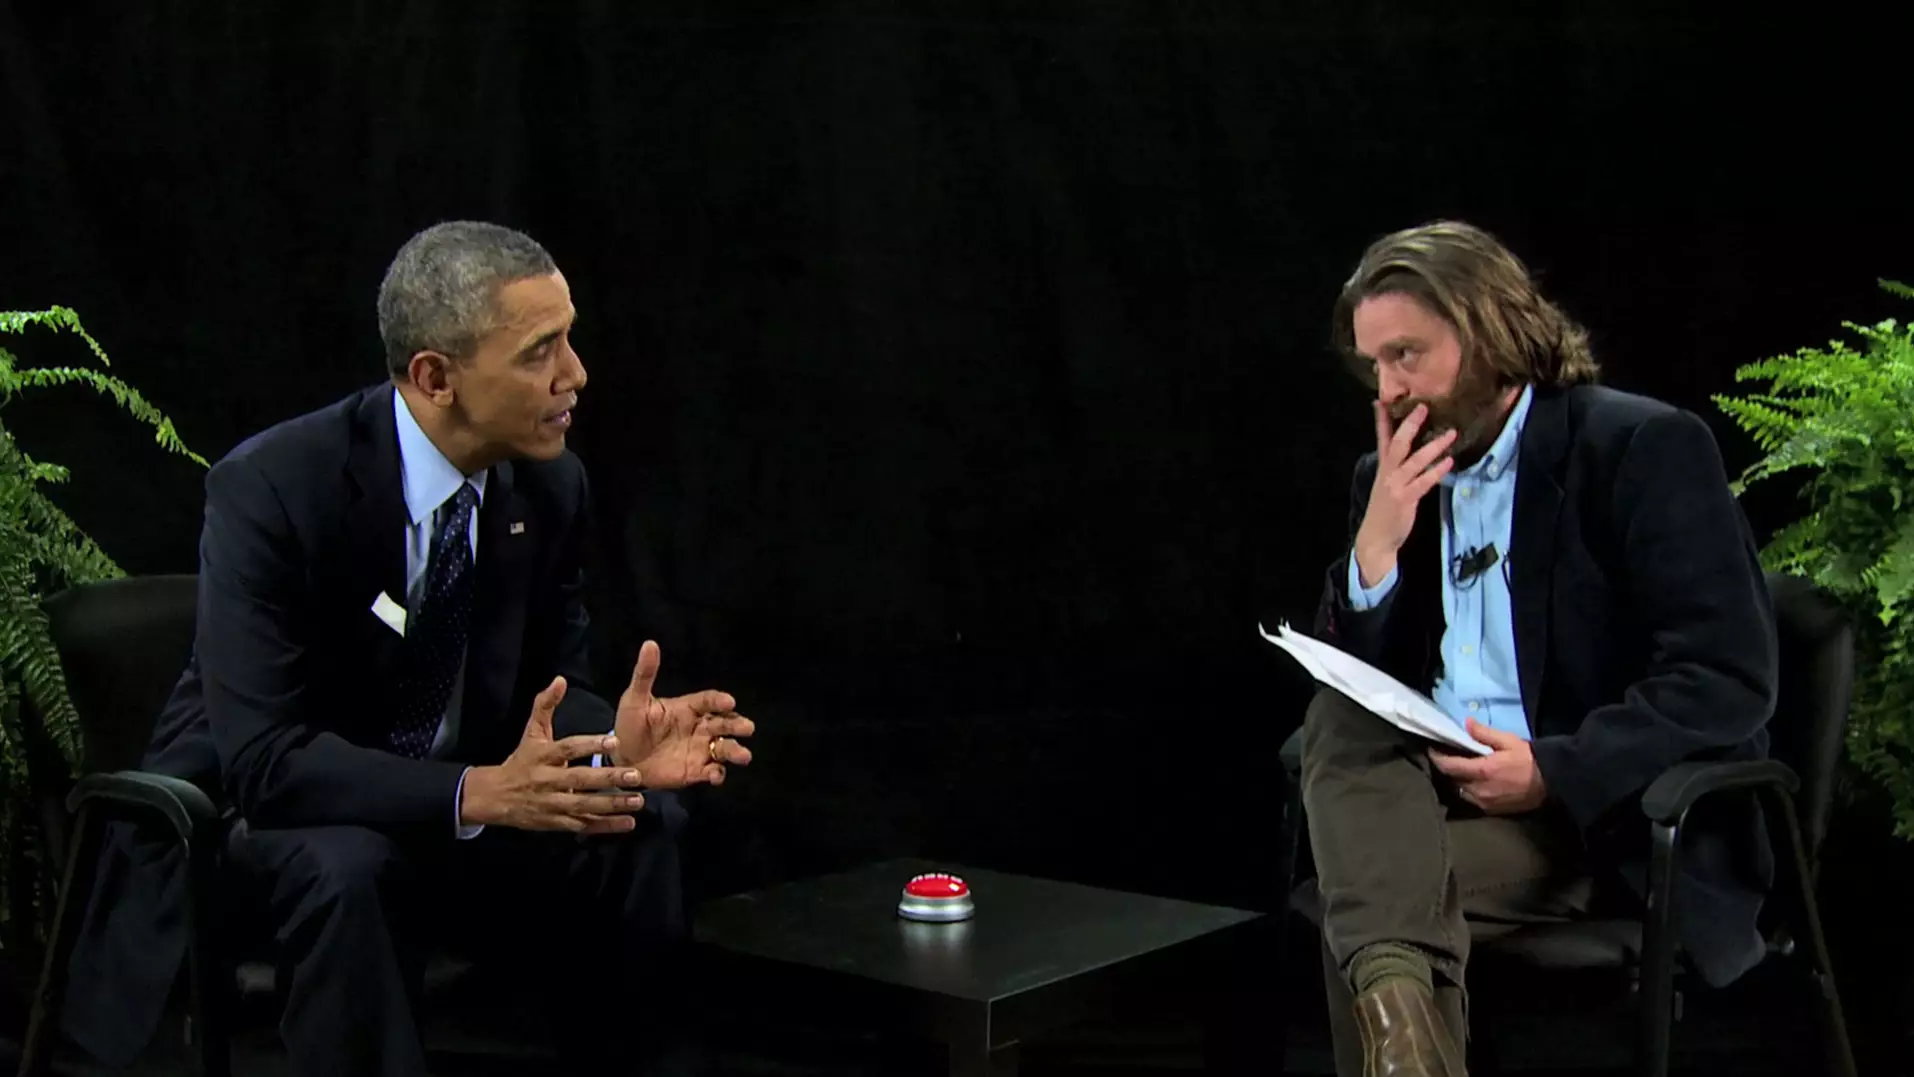 Zach Galifianakis’ Between Two Ferns: The Movie Announced